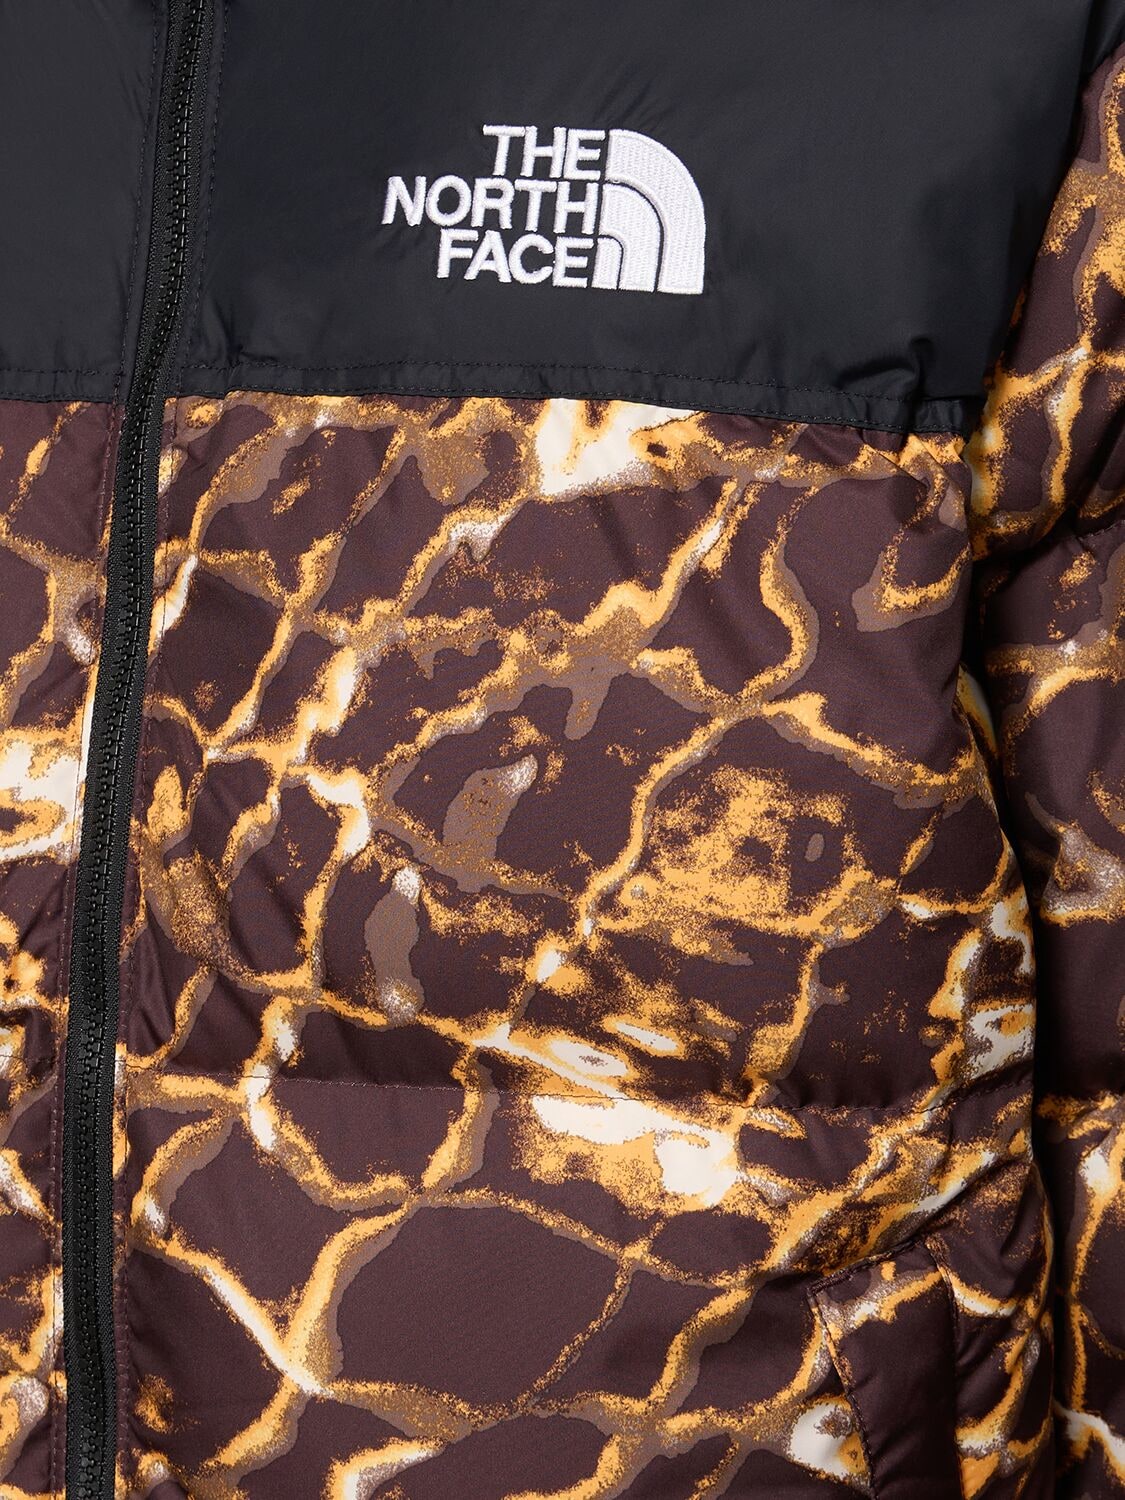 The North Face 1996 Retro Nuptse down puffer jacket in brown distort print